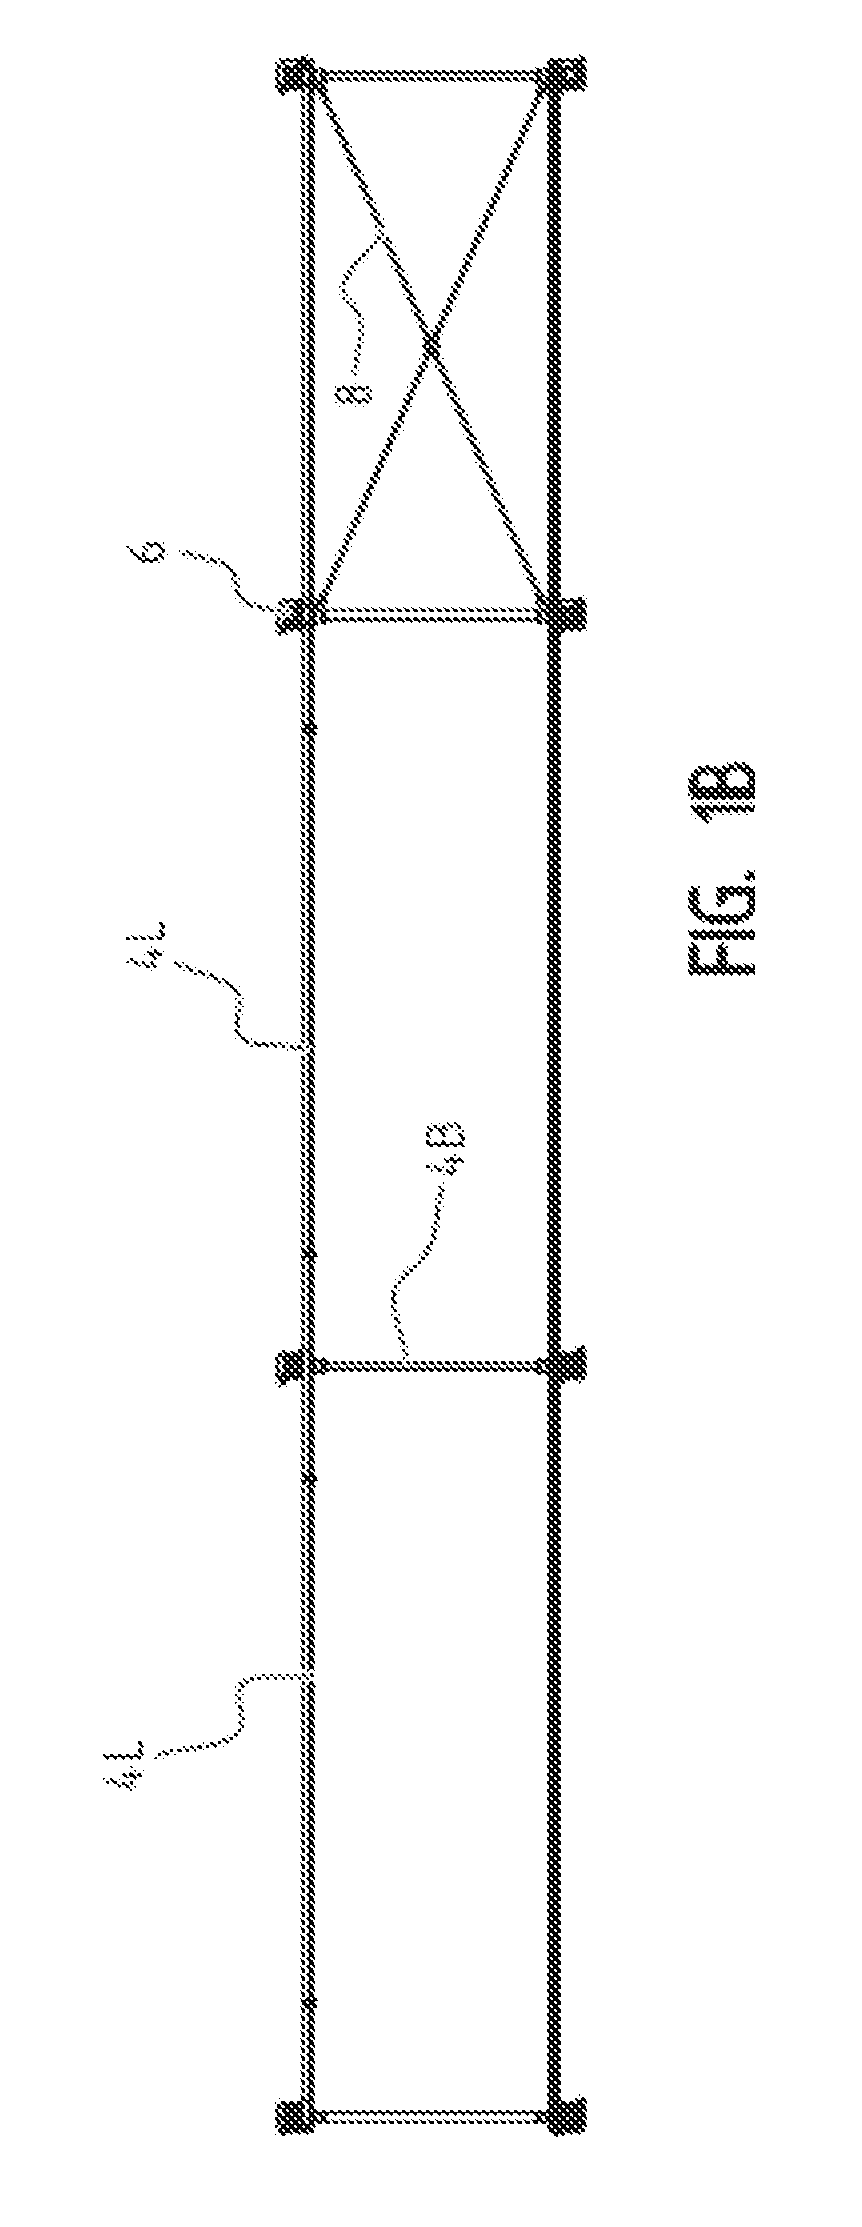 Scaffold with scaffolding elements and methods for erection thereof